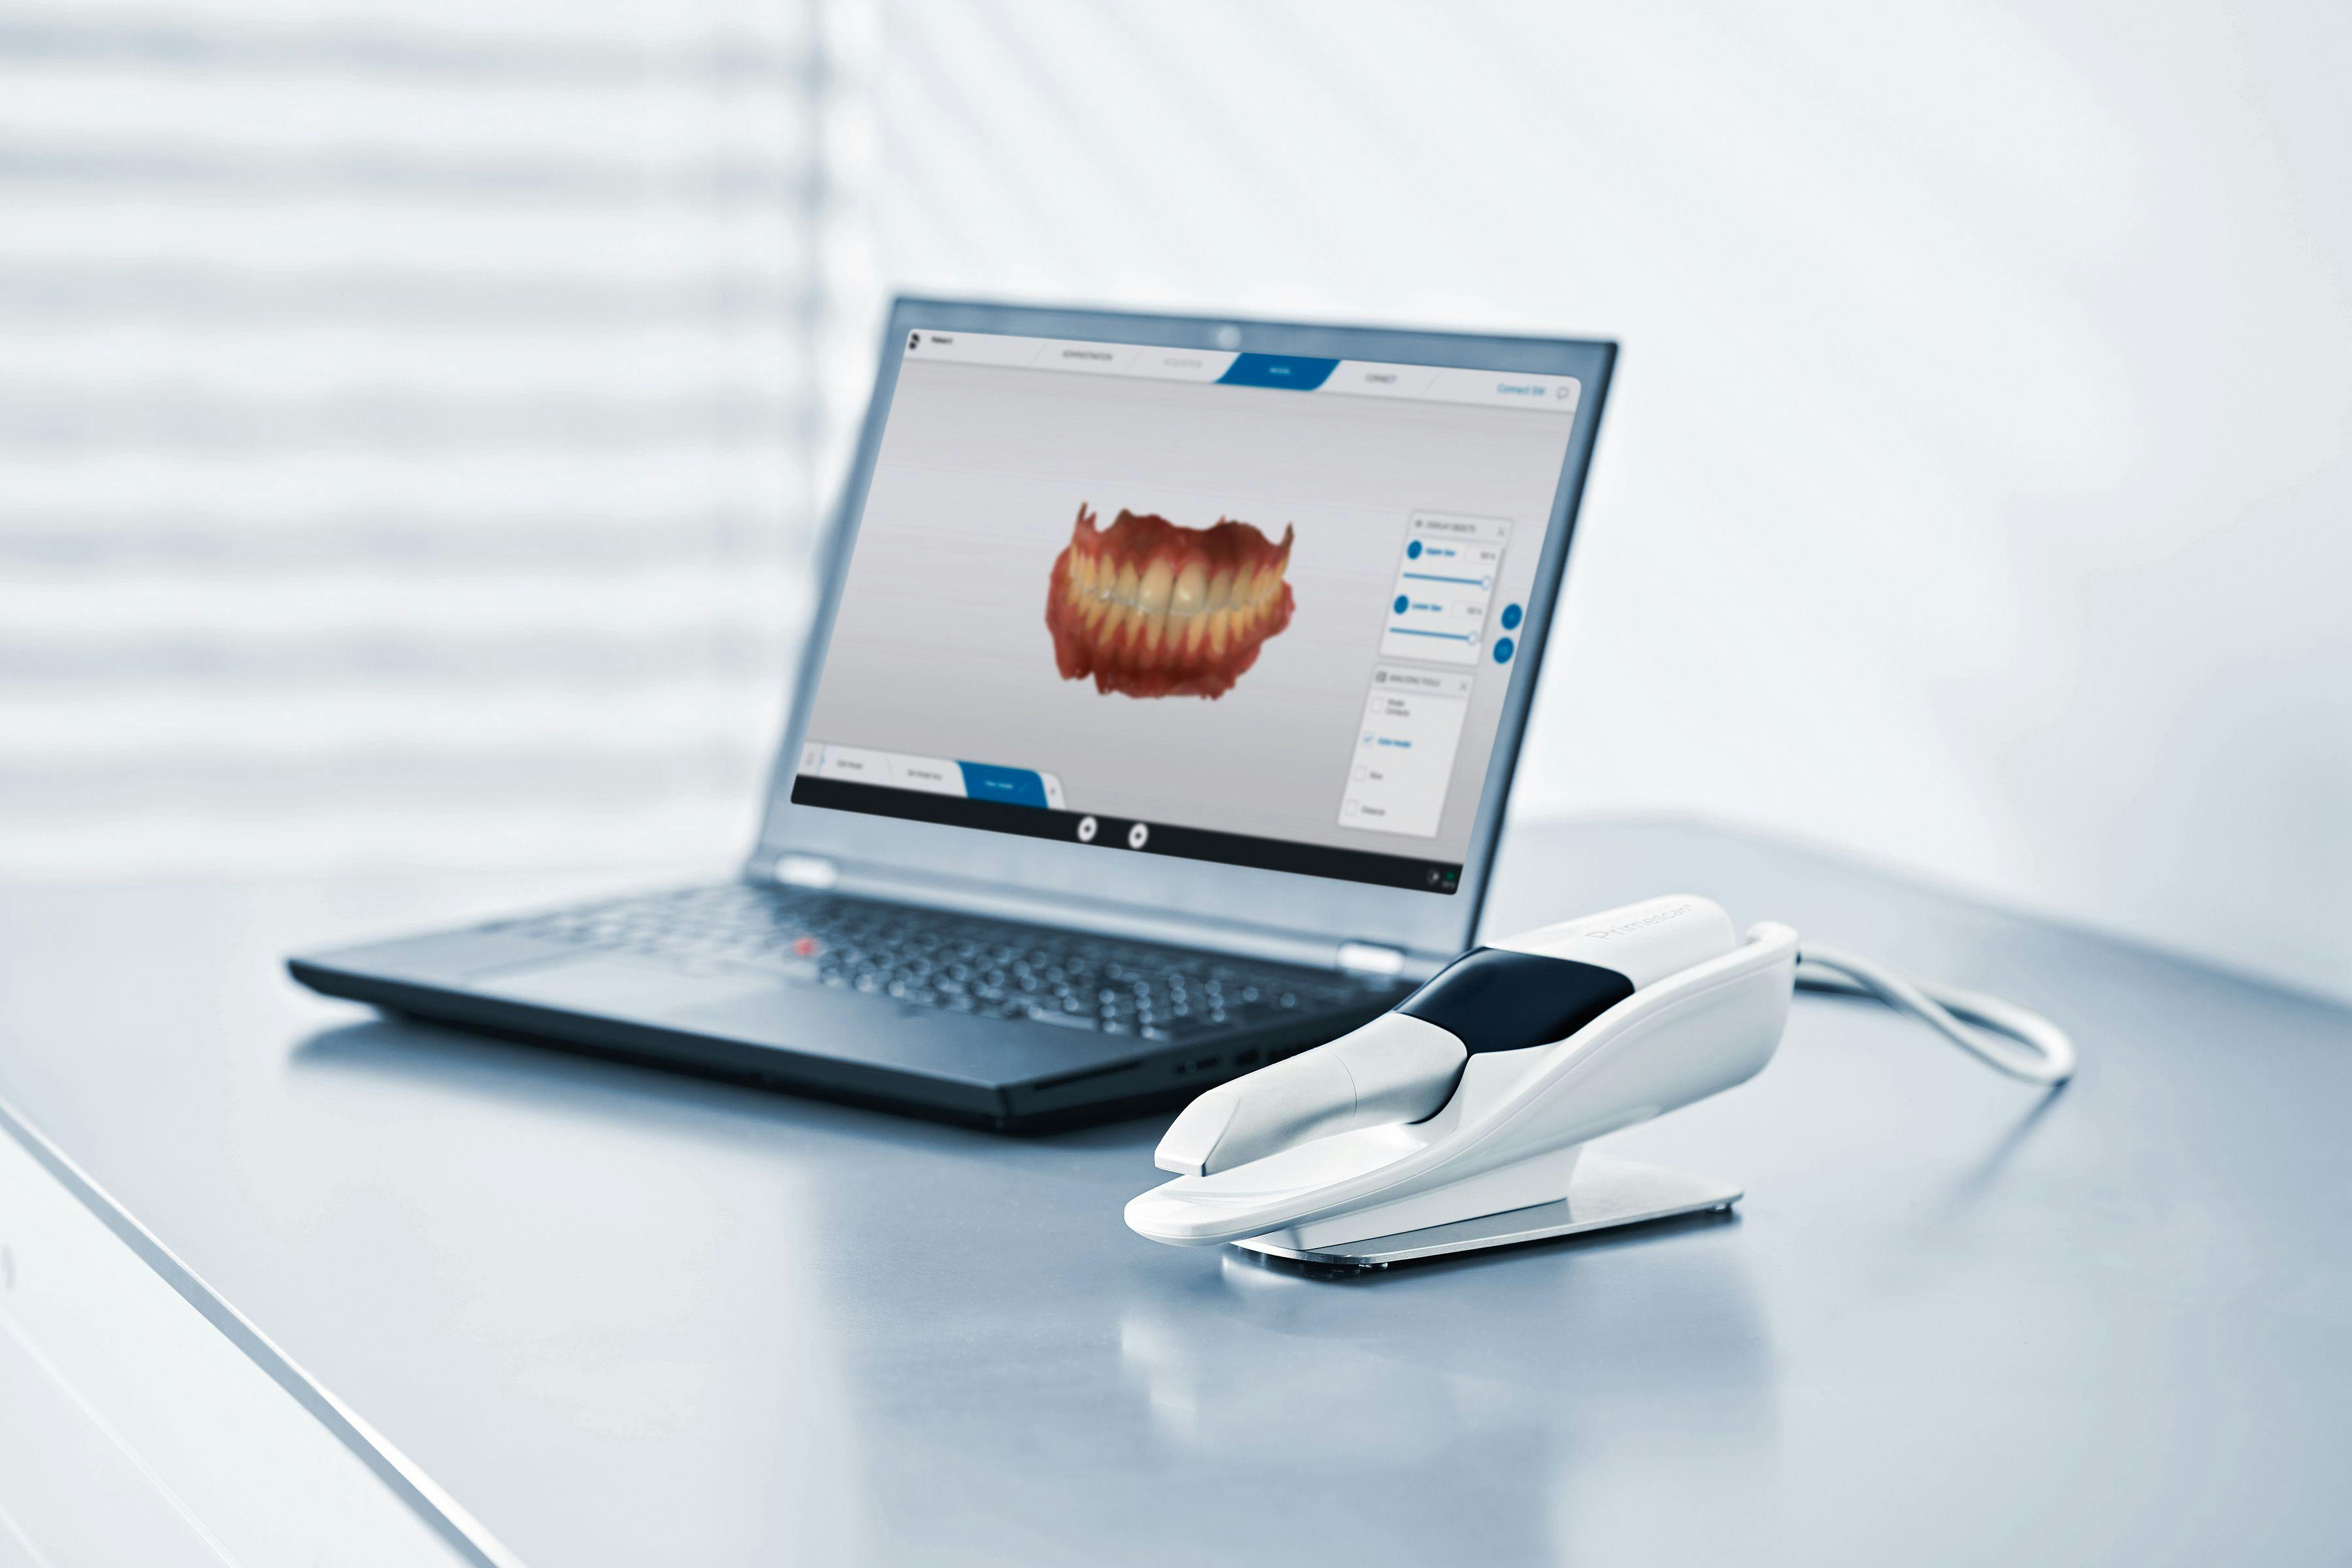 Primescan Connect intraoral scanning solution from Dentsply Sirona | Image Credit: © Dentsply Sirona